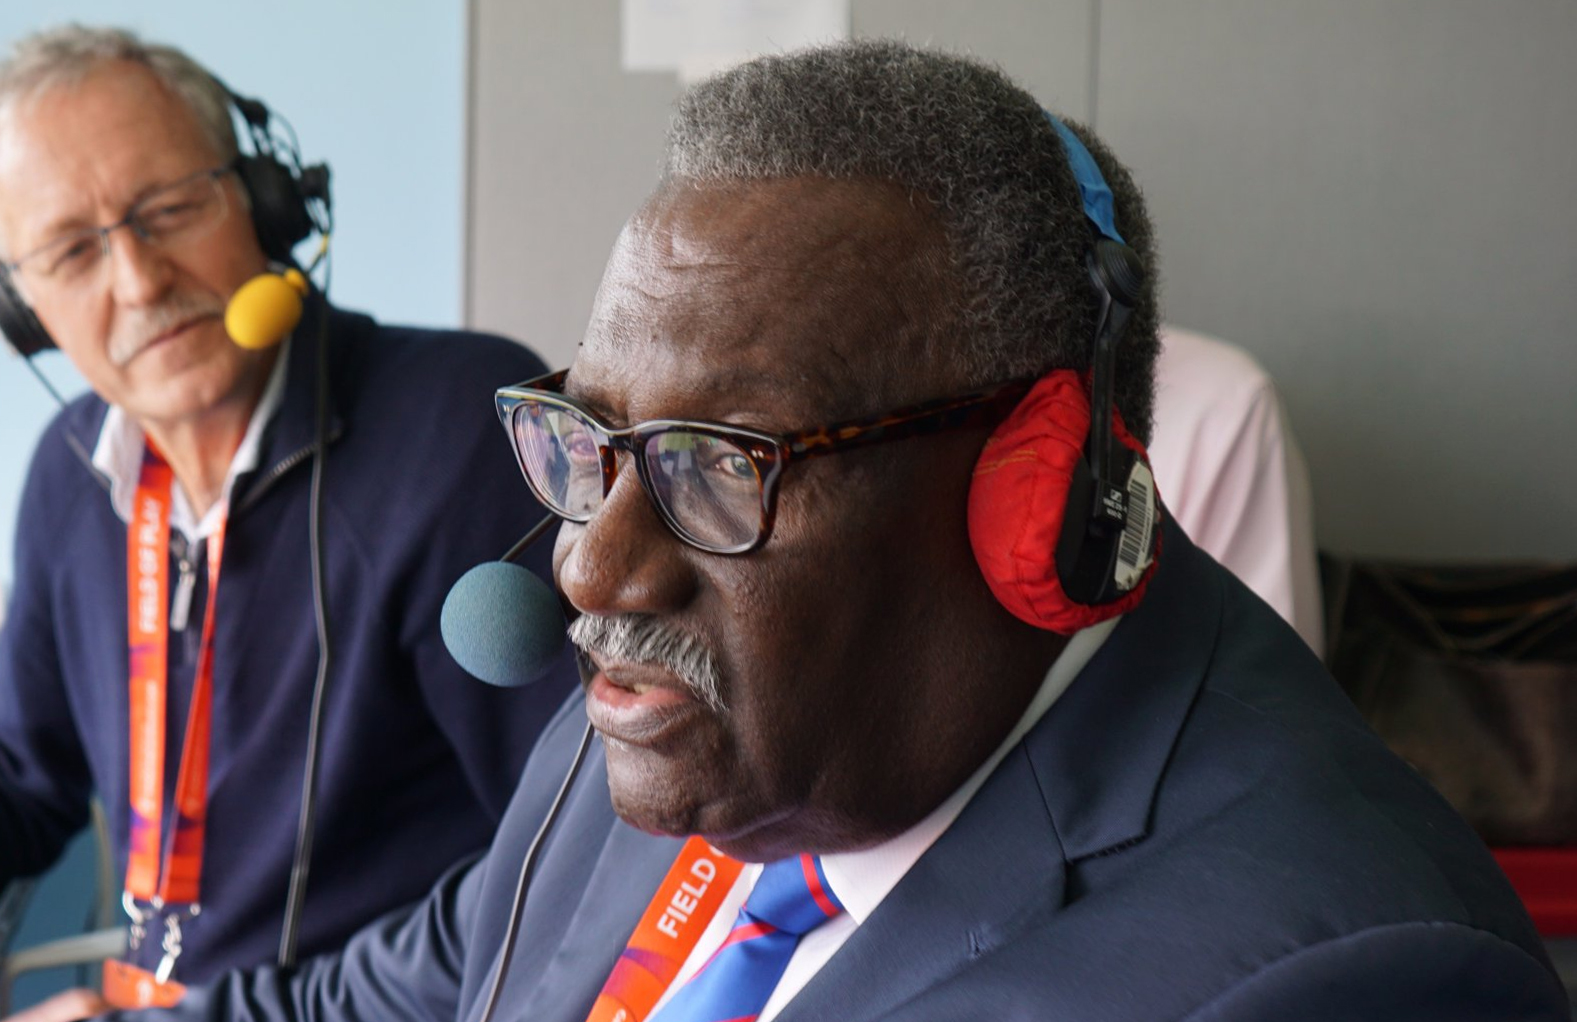 Clive Lloyd in the commentary box during the ICC Cricket World Cup 2019 final.